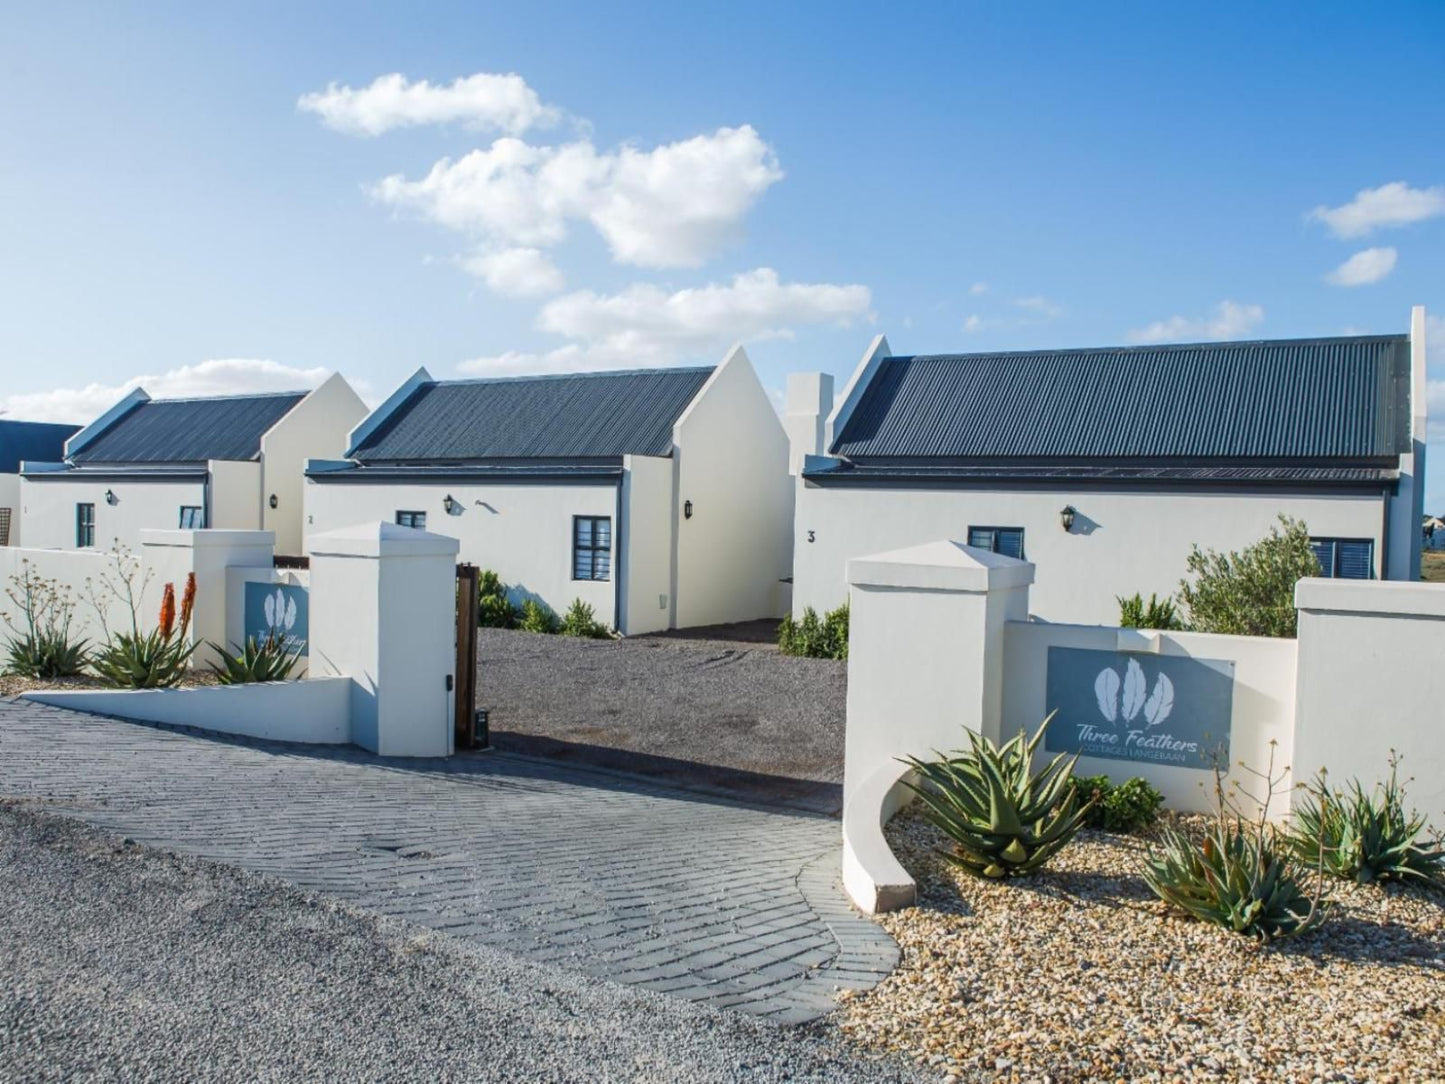 Three Feathers Cottages Olifantskop Langebaan Western Cape South Africa Building, Architecture, House